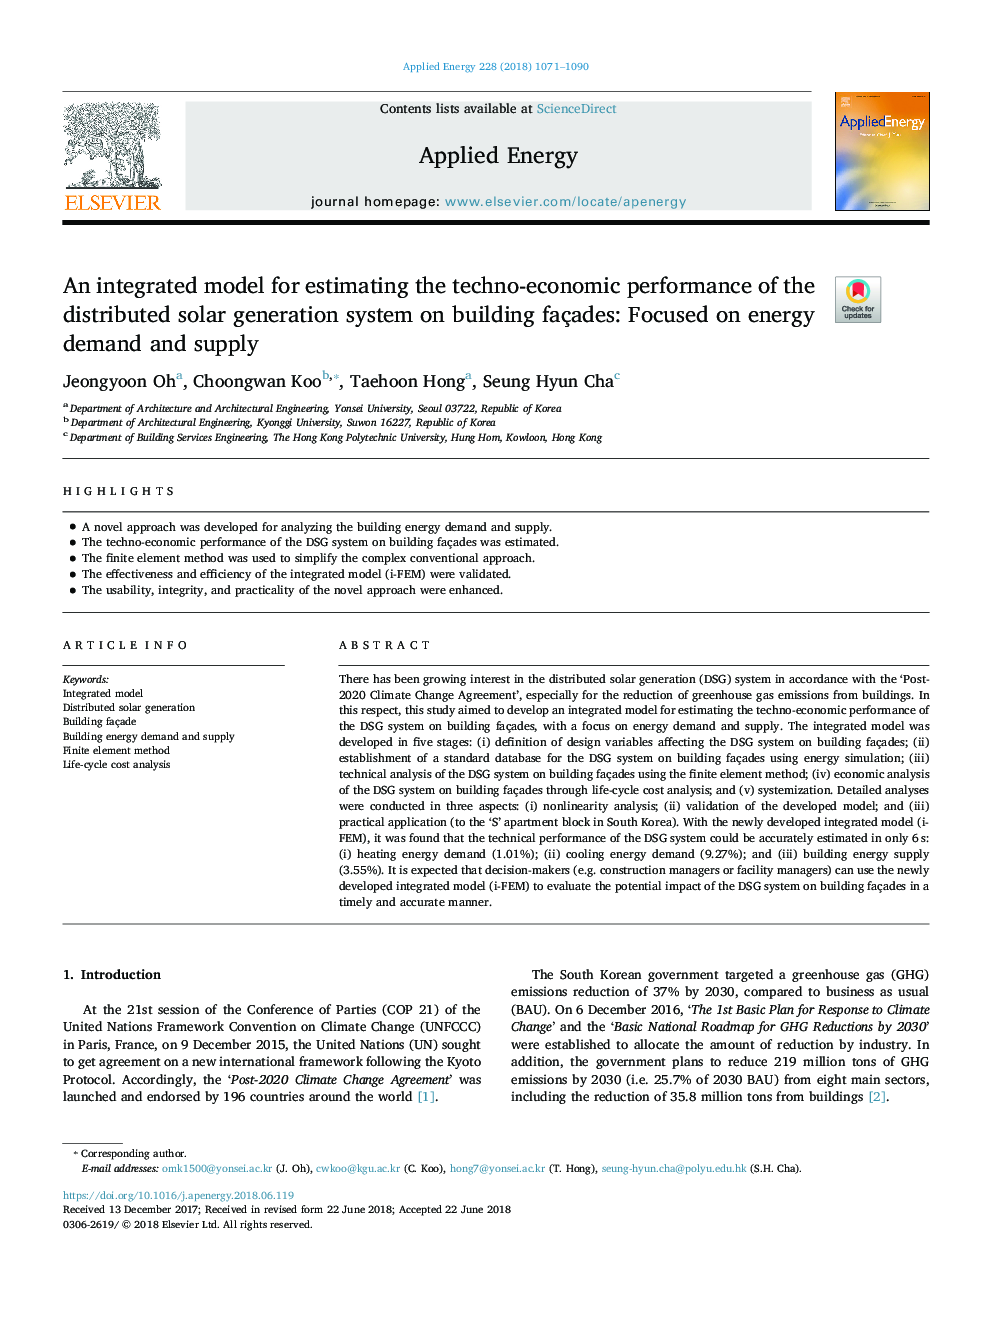 An integrated model for estimating the techno-economic performance of the distributed solar generation system on building façades: Focused on energy demand and supply